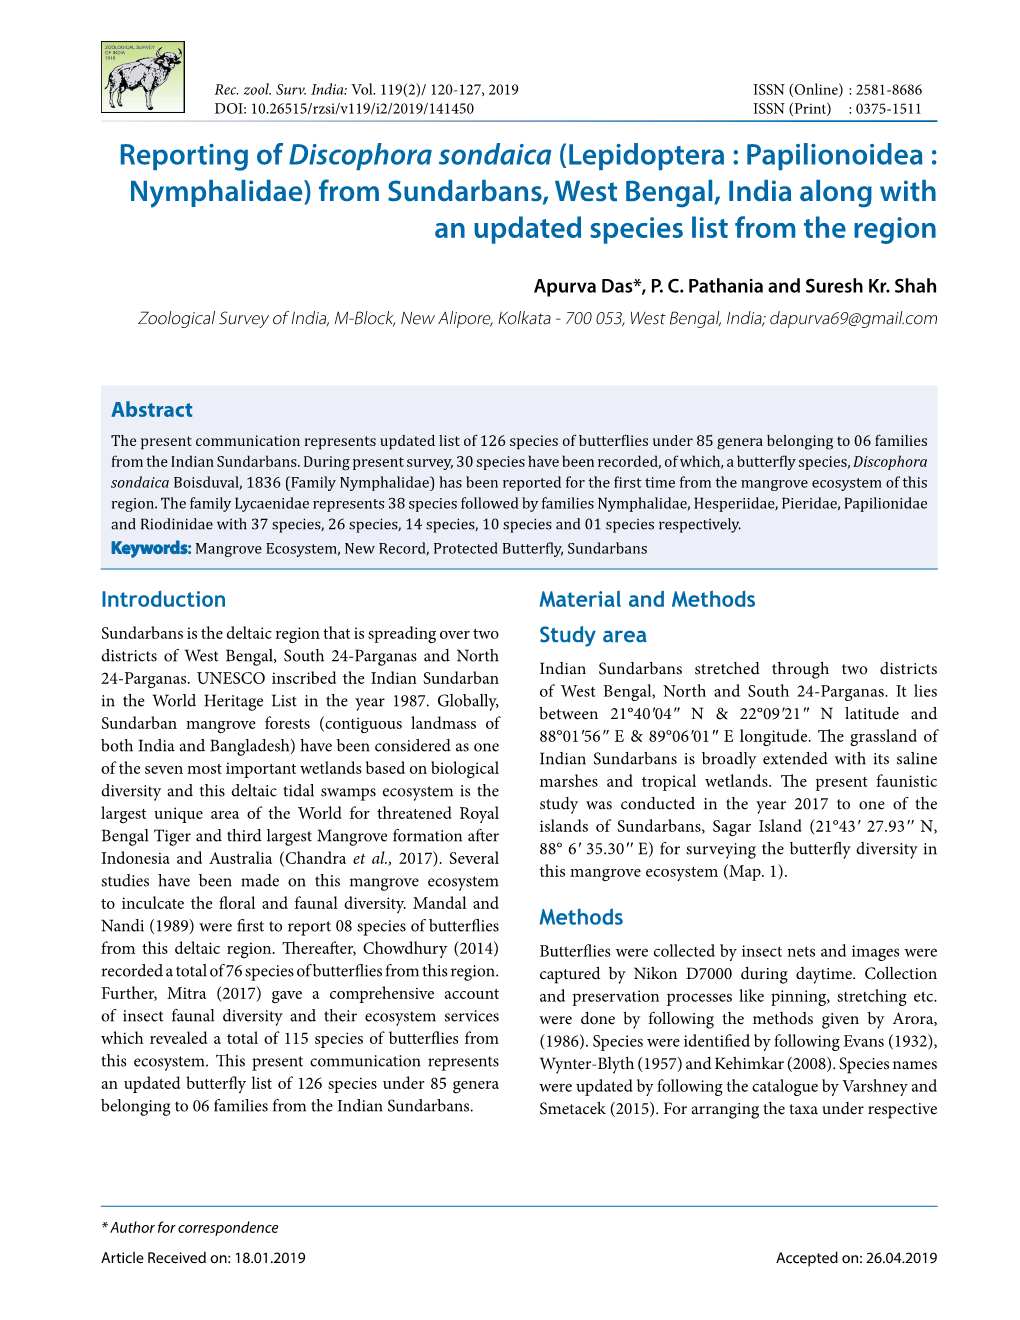 Reporting of Discophora Sondaica (Lepidoptera : Papilionoidea : Nymphalidae) from Sundarbans, West Bengal, India Along with an Updated Species List from the Region